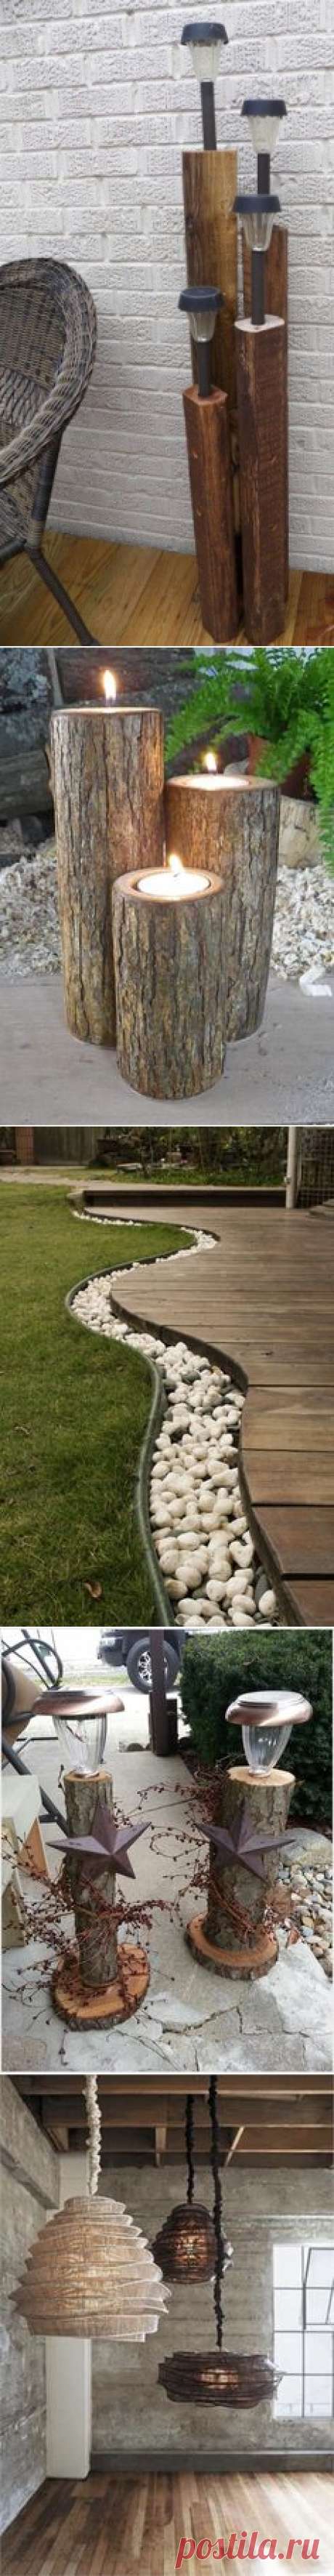 (2) Make Solar Light Deck Decor I would add rope wrapped around the middle to give a real nautical look. | Garden ideas